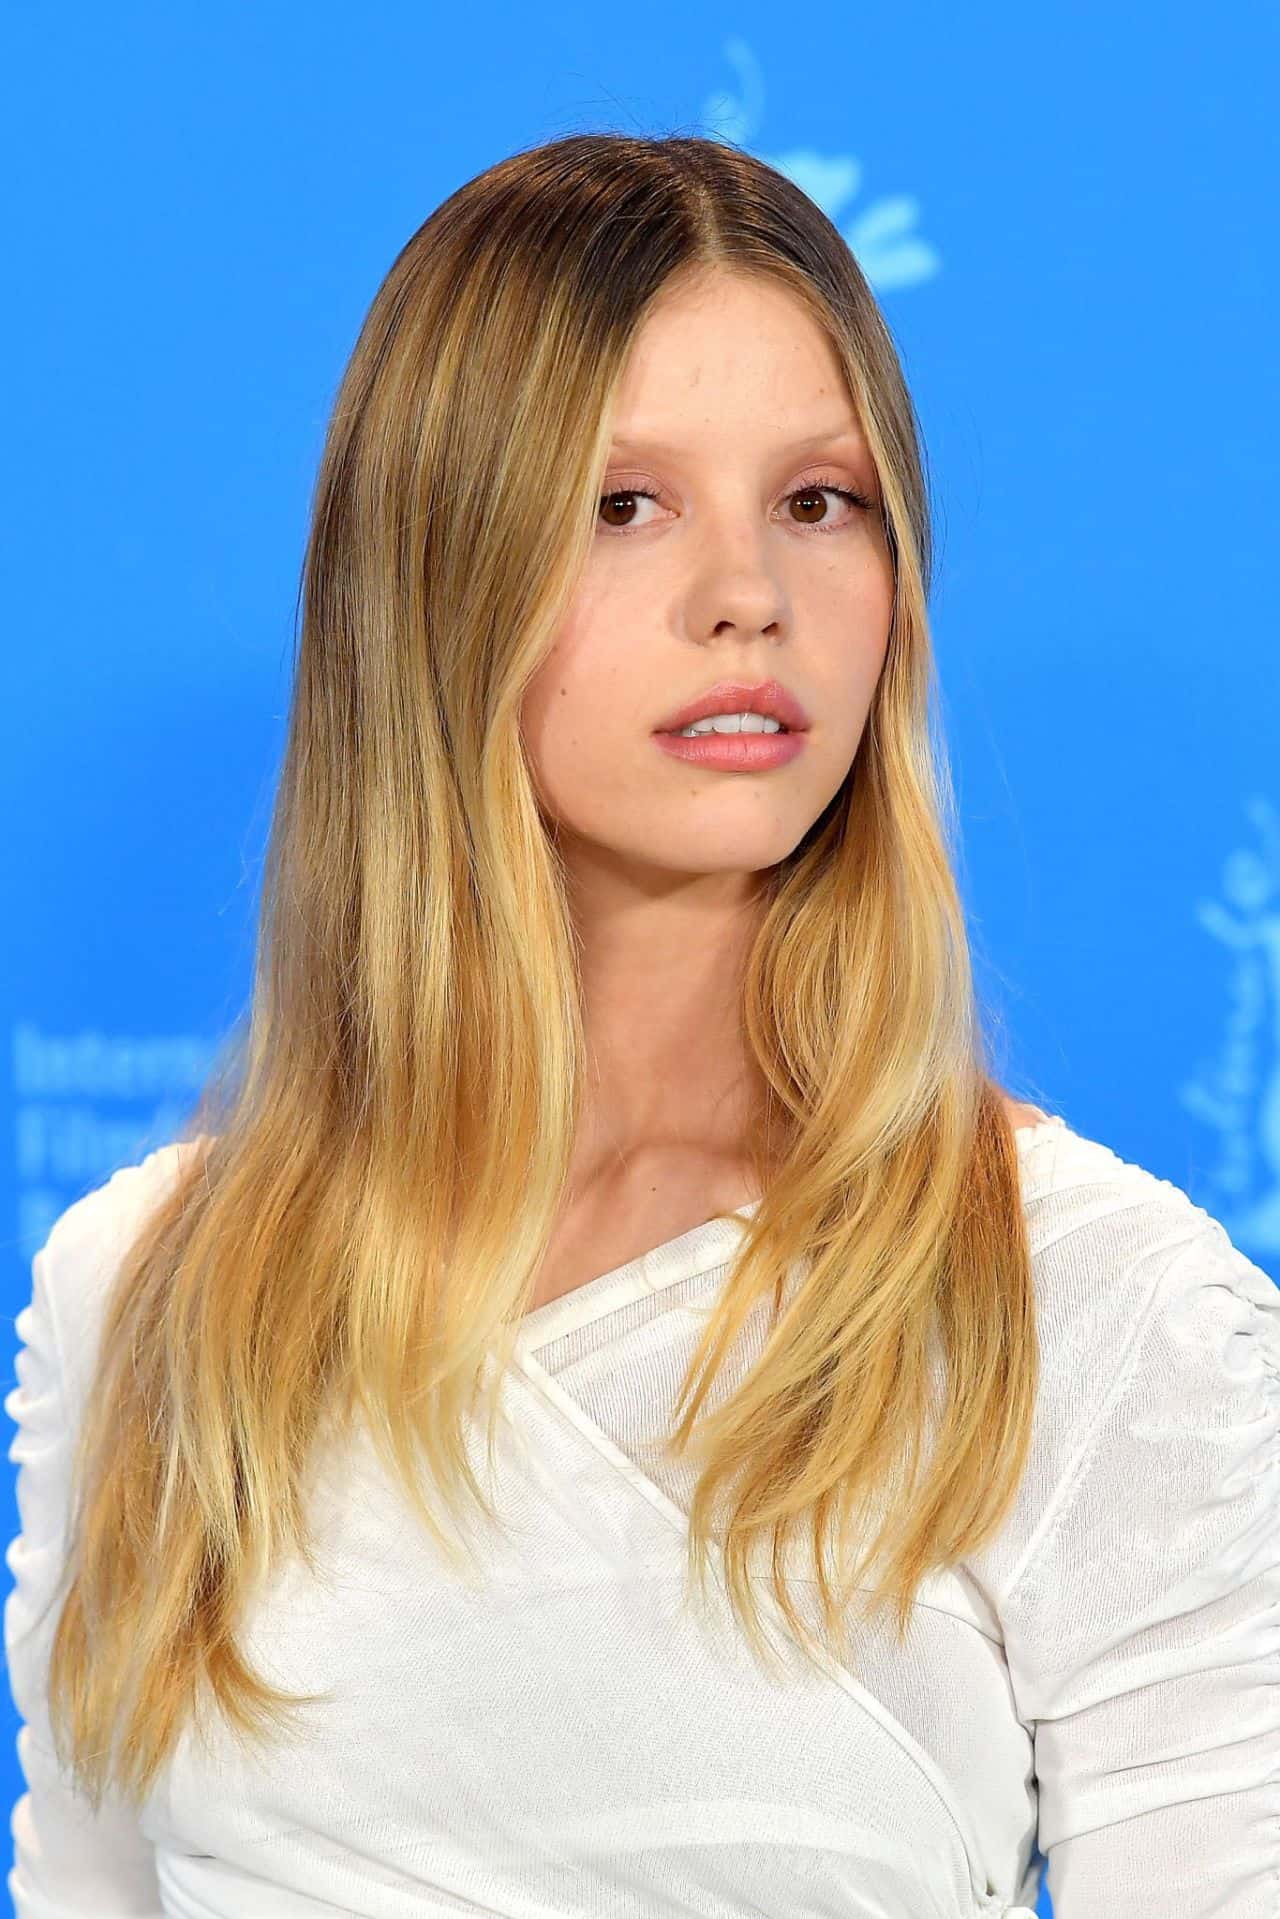 Mia Goth at "Infinity Pool" Photocall and Q&A at Berlin Film Festival